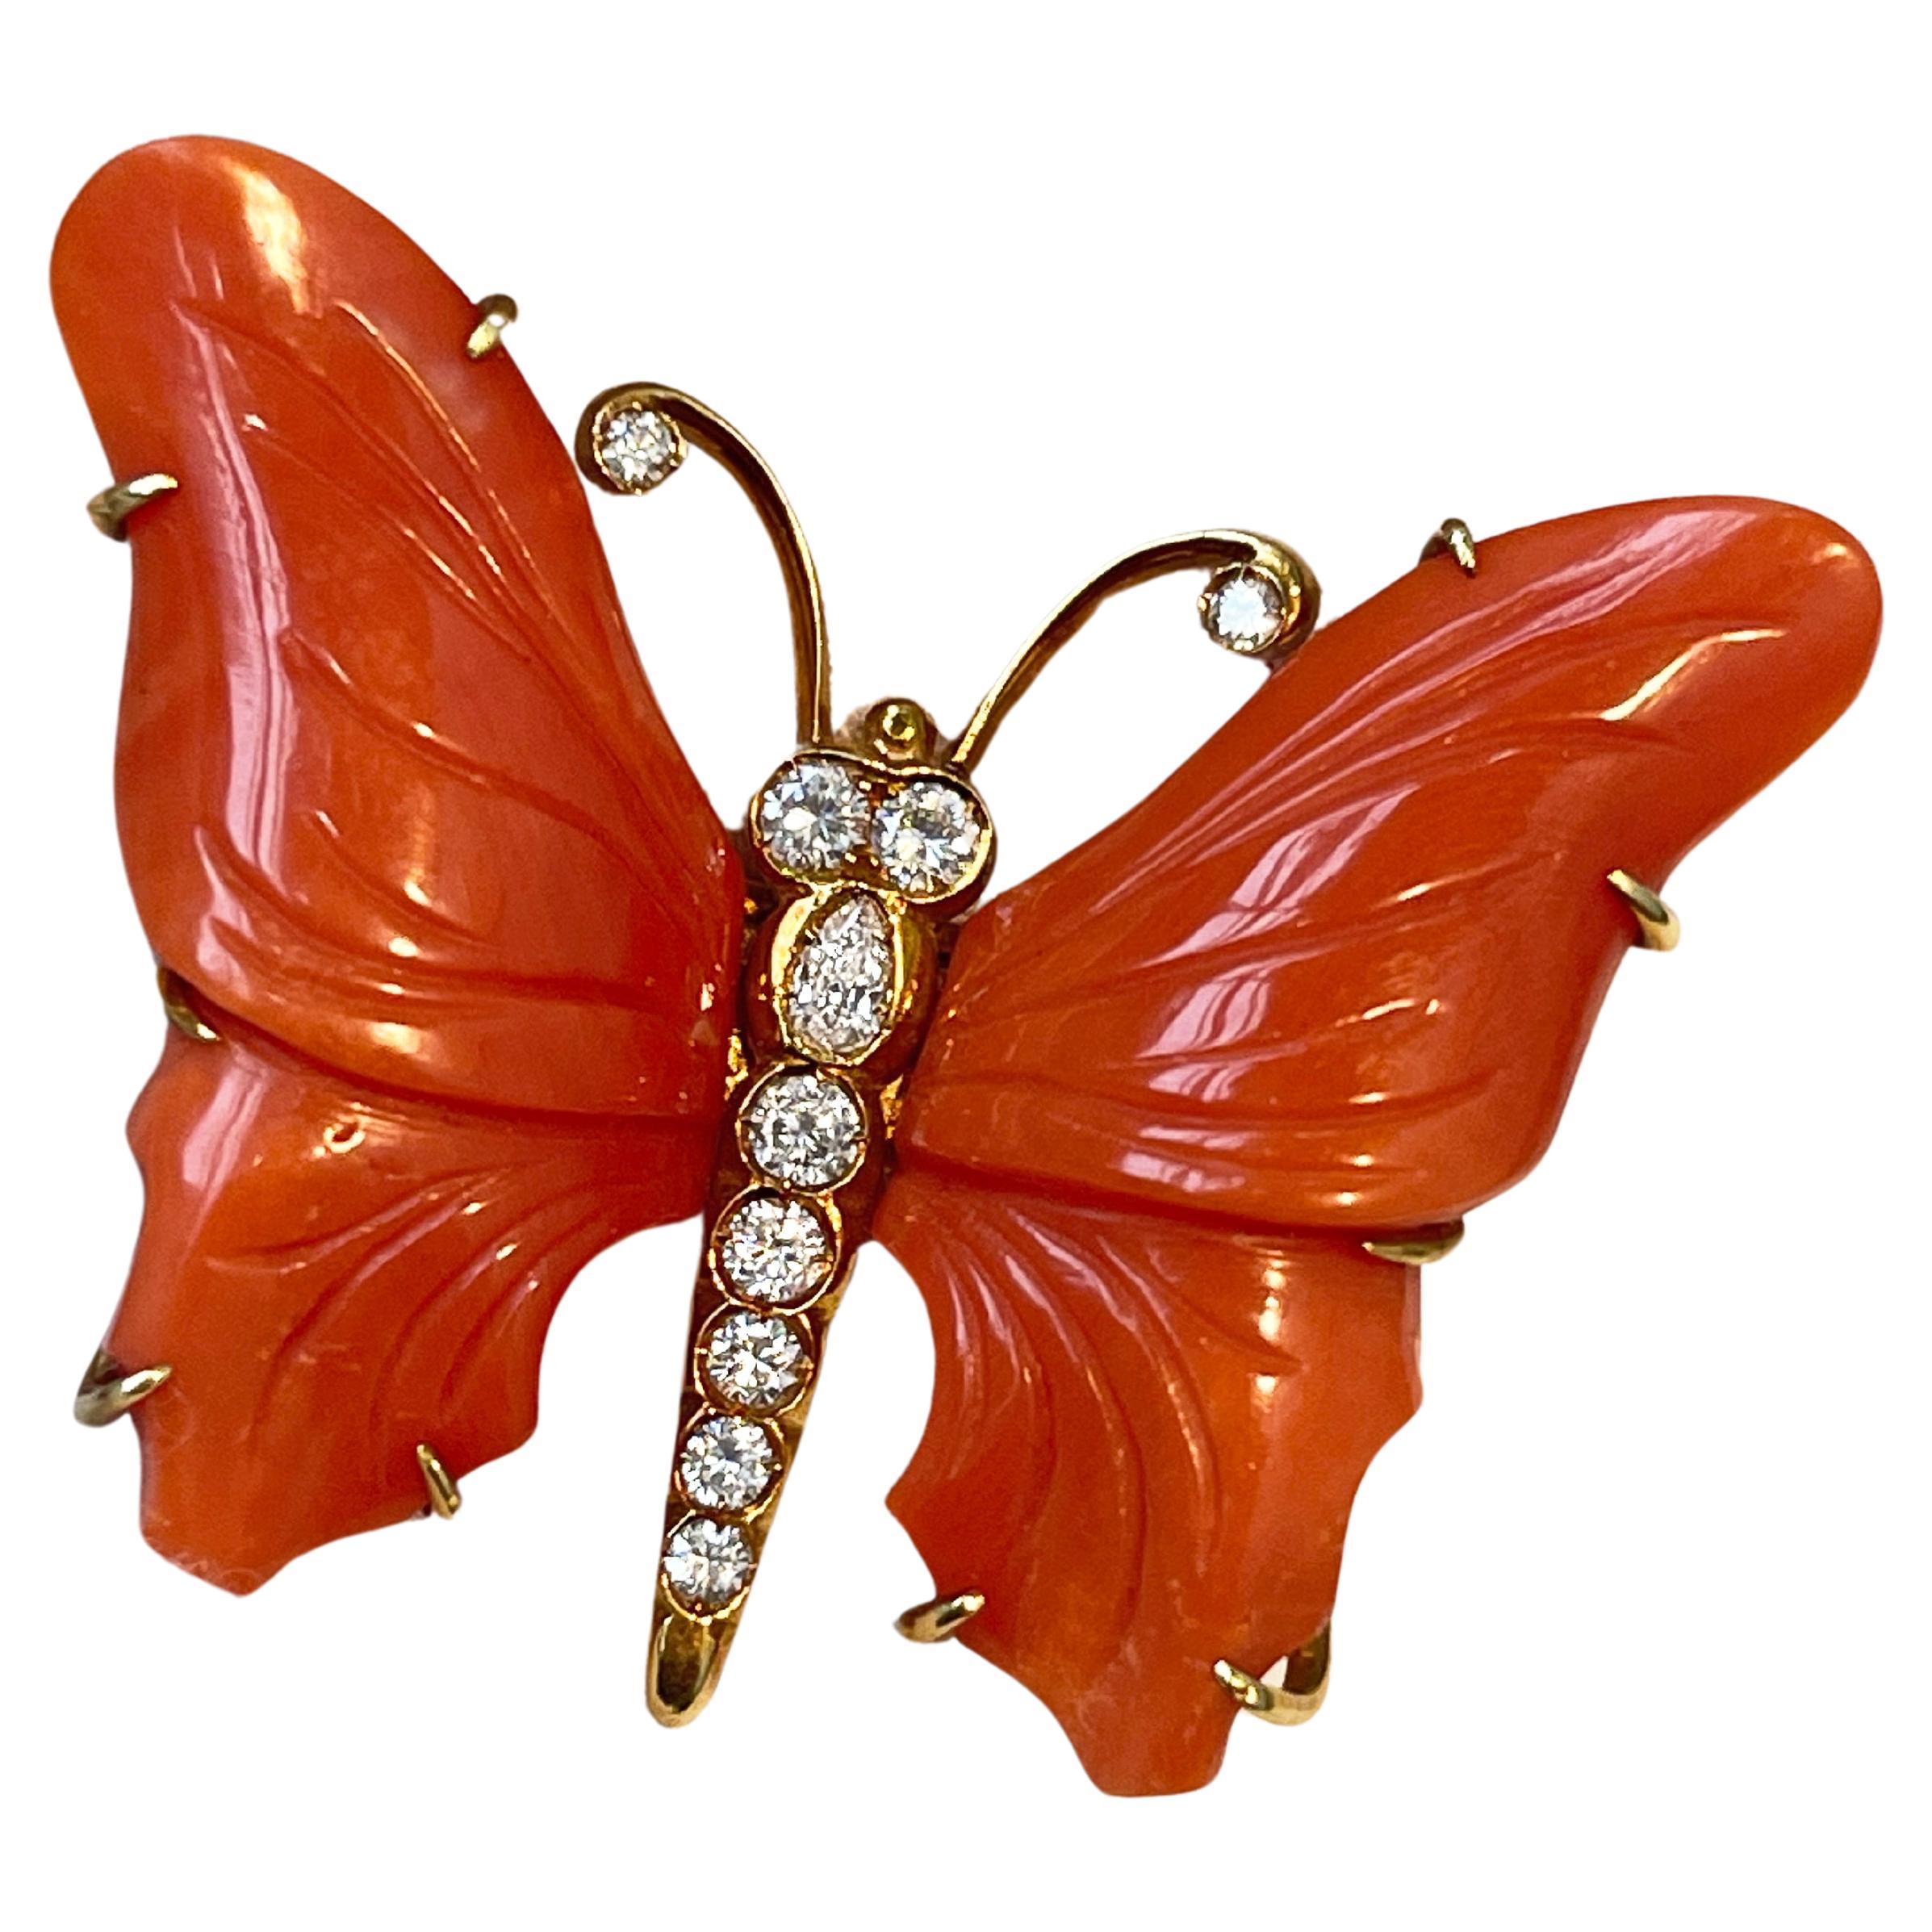 Beautiful vintage butterfly brooch totally hand carved and made in Mediterranean Coral and 18 karat yellow gold is the base, as brilliant cut diamonds embellish the body. 
Golden wire curls for the antennas, accented by a single diamond on the tips.